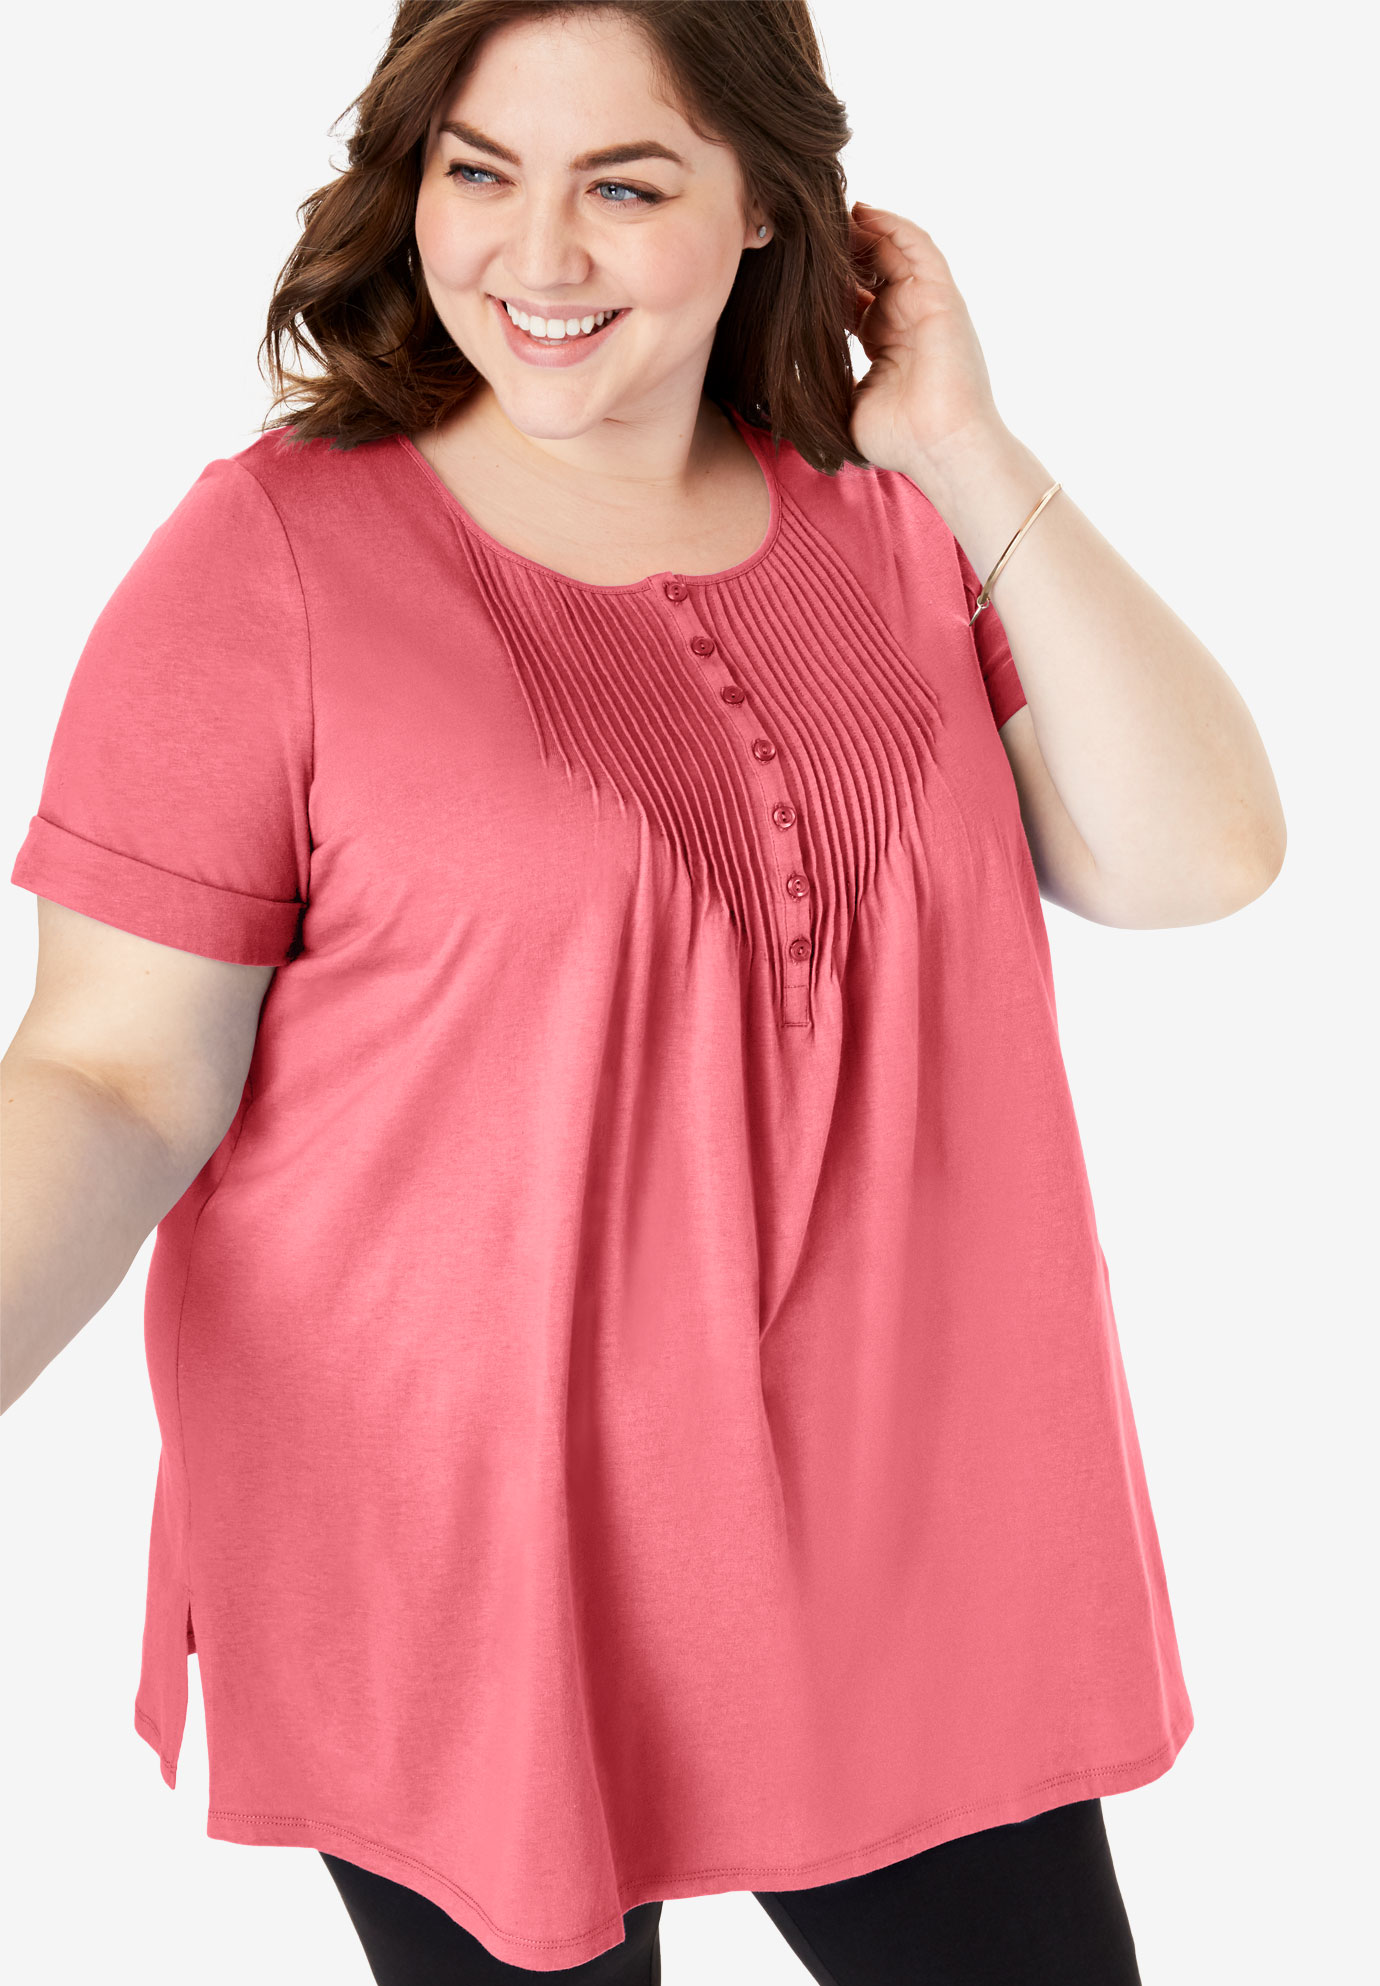 Pintucked Henley Tunic| Plus Size Tops | Woman Within